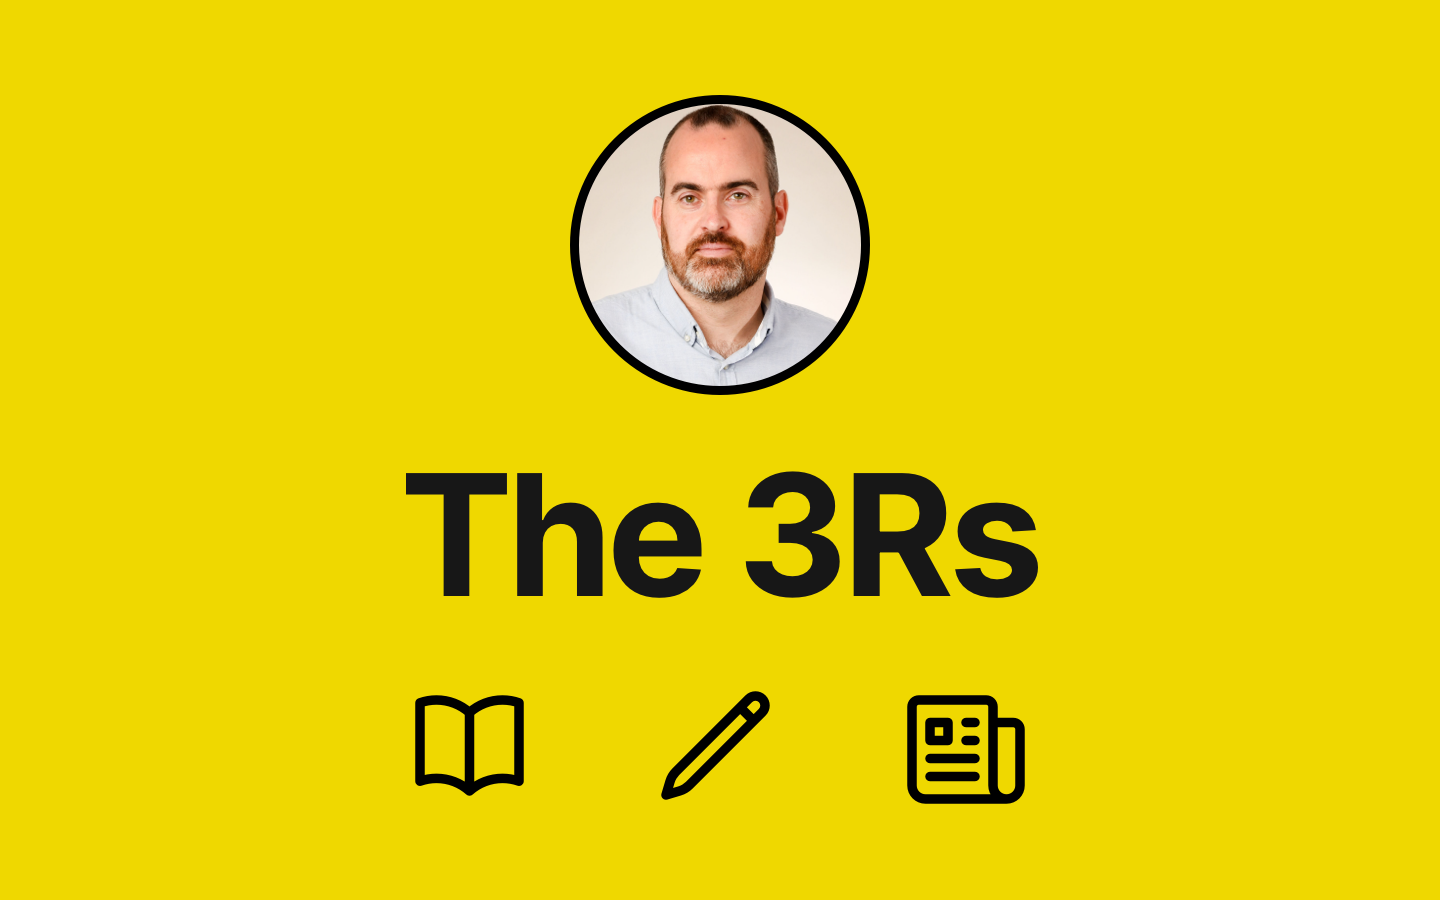 The 3Rs: What I'm reading, (w)riting, & the research I'm interested in - Issue #10 feature image